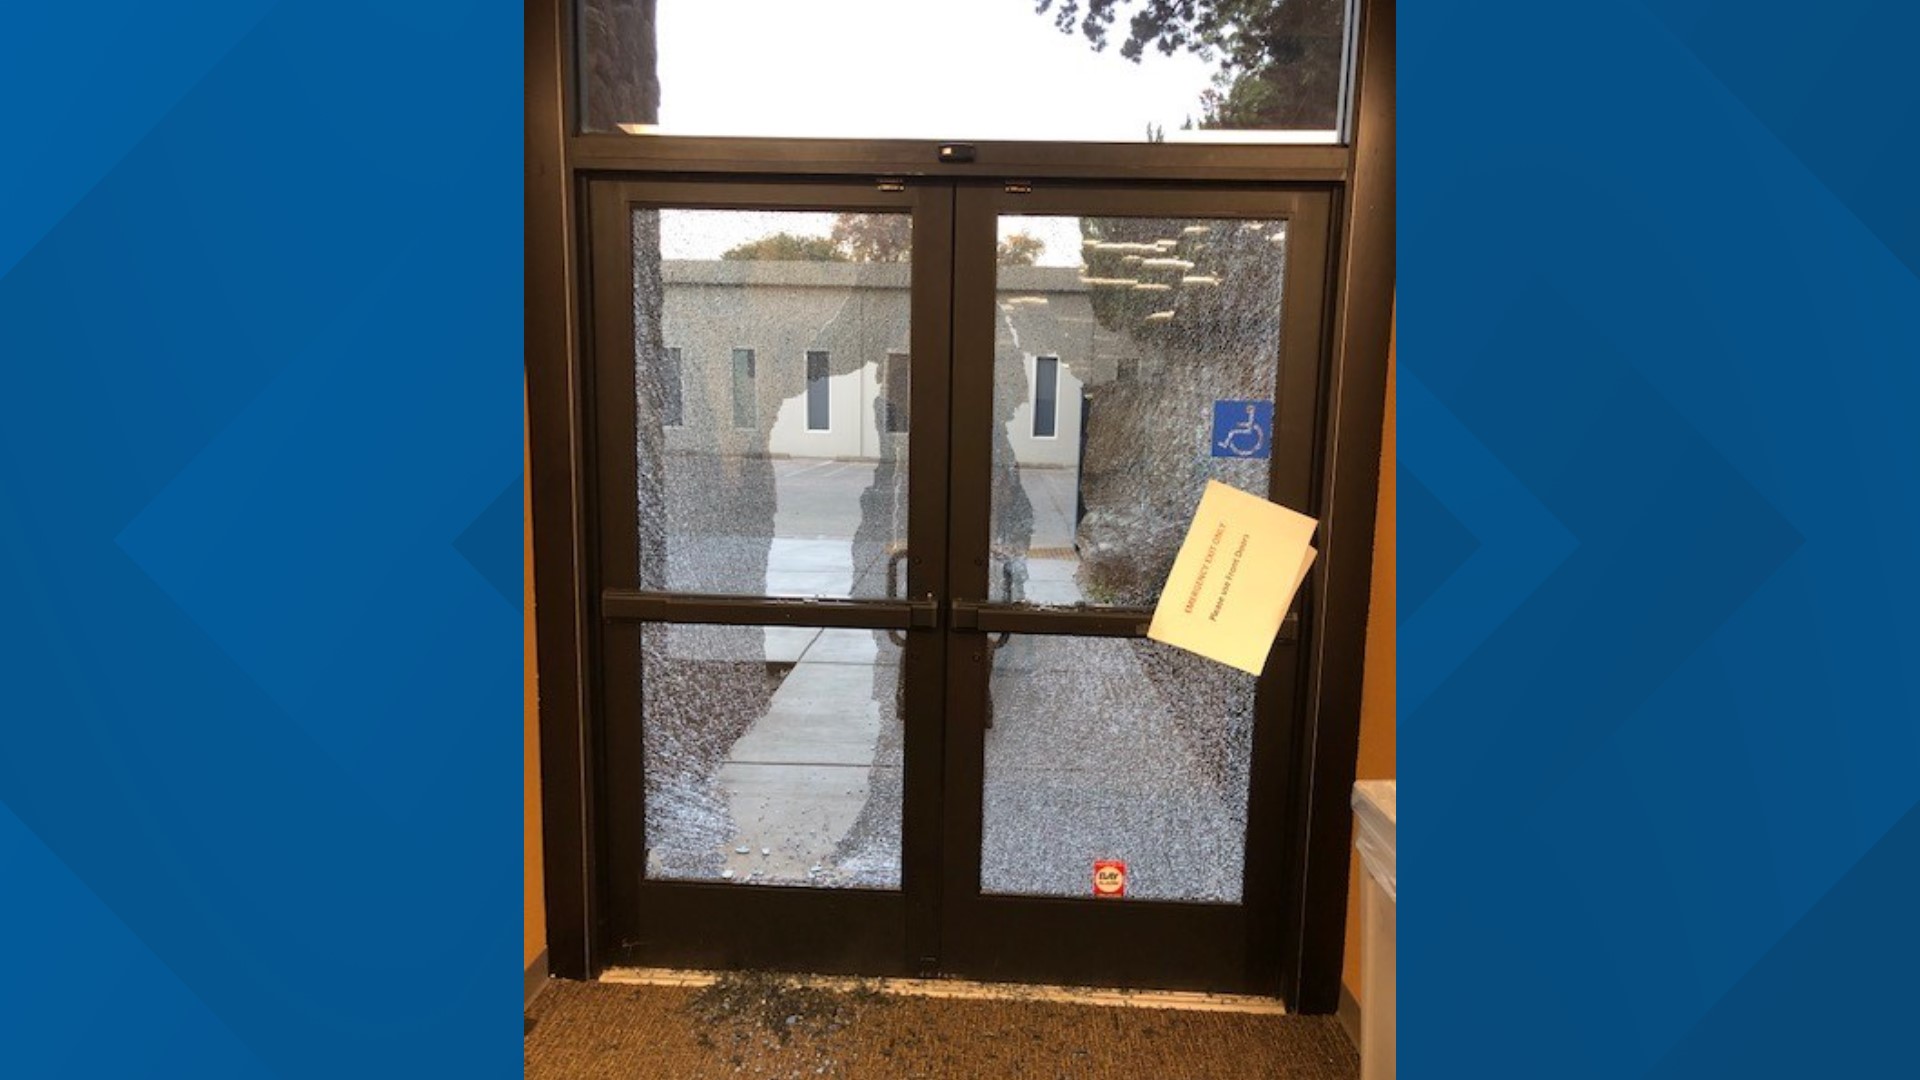 The vandal left shattered glass, but failed to shatter plans at Sacramento's Society for the Blind in Midtown.